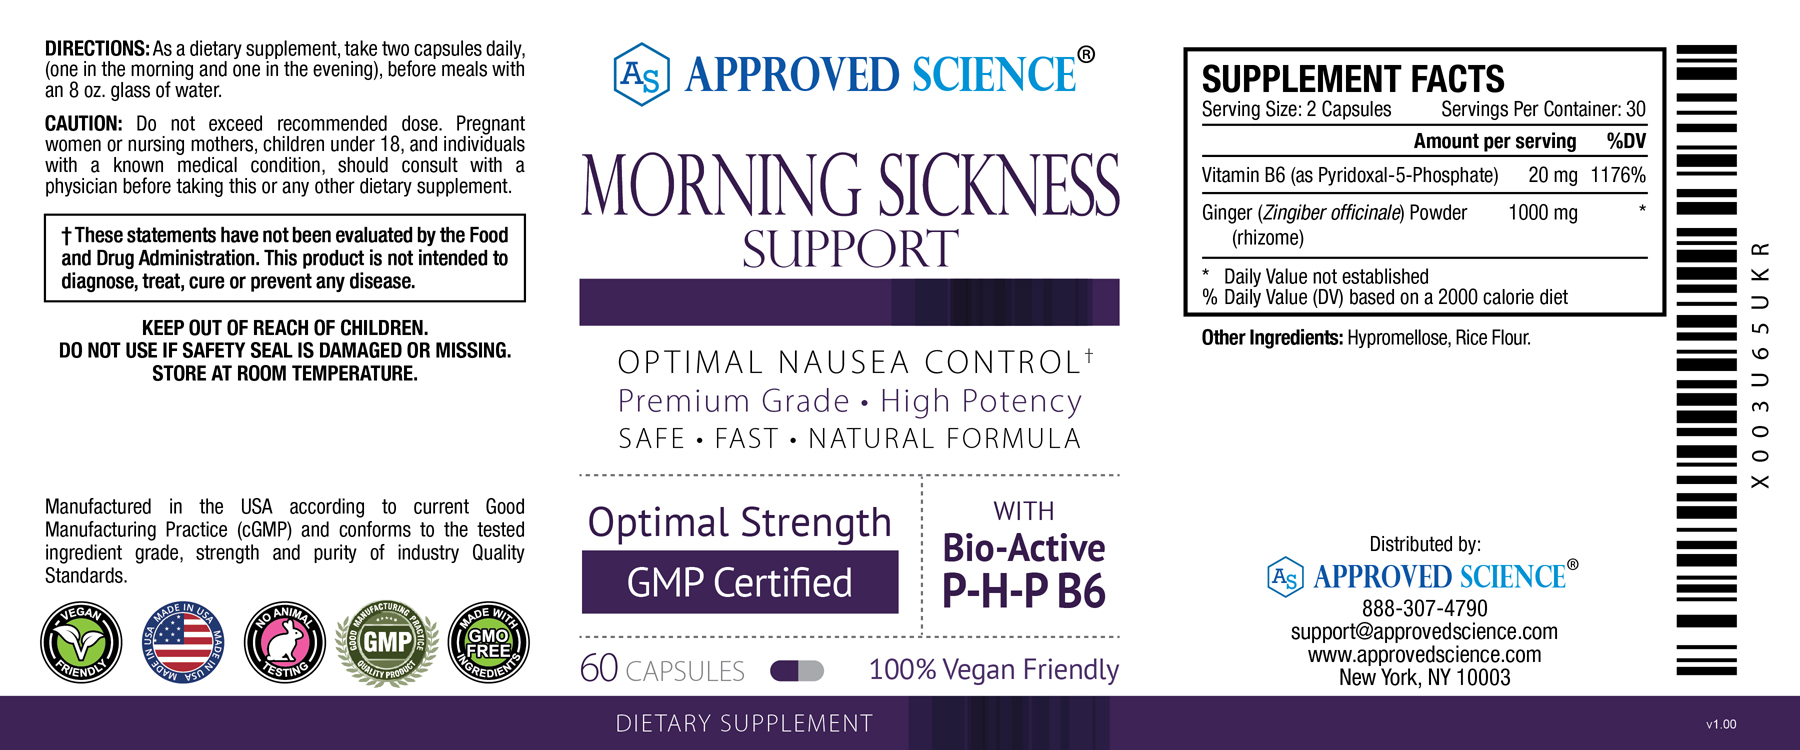 Morning SIckness Support Supplement Facts